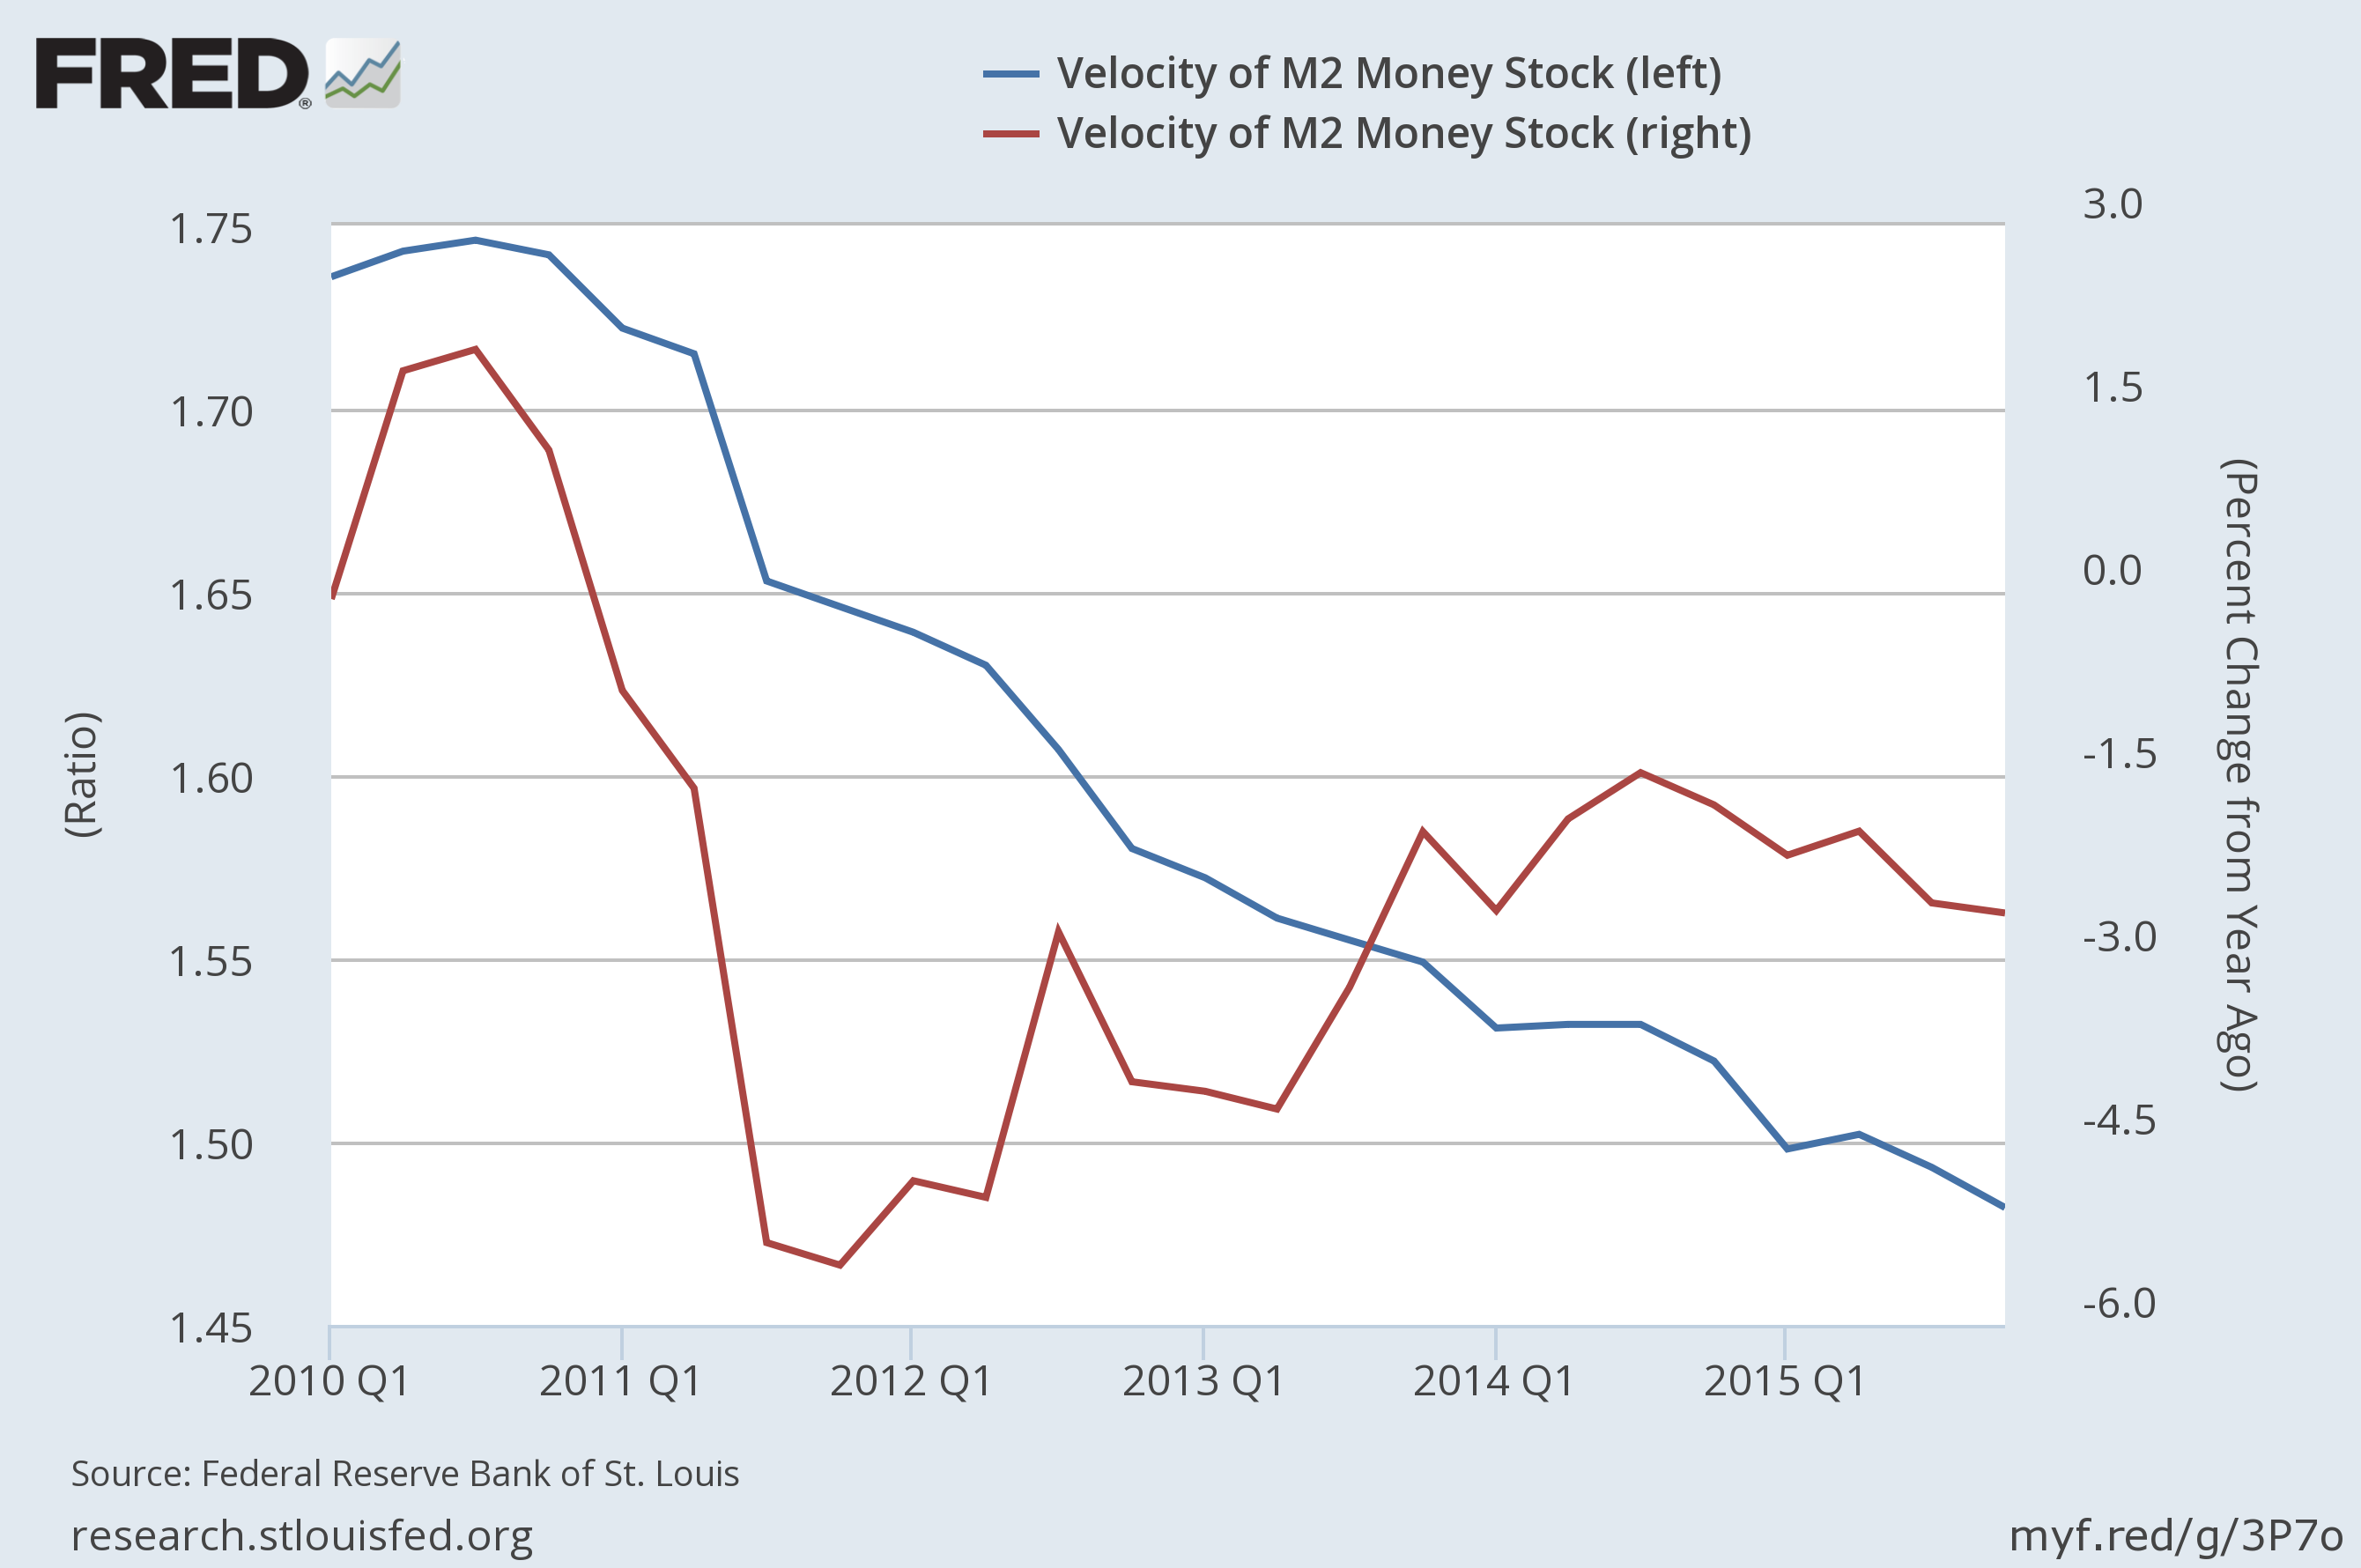 M2 Money velocity (blue curve) and its percent change from a year ago (maroon curve)